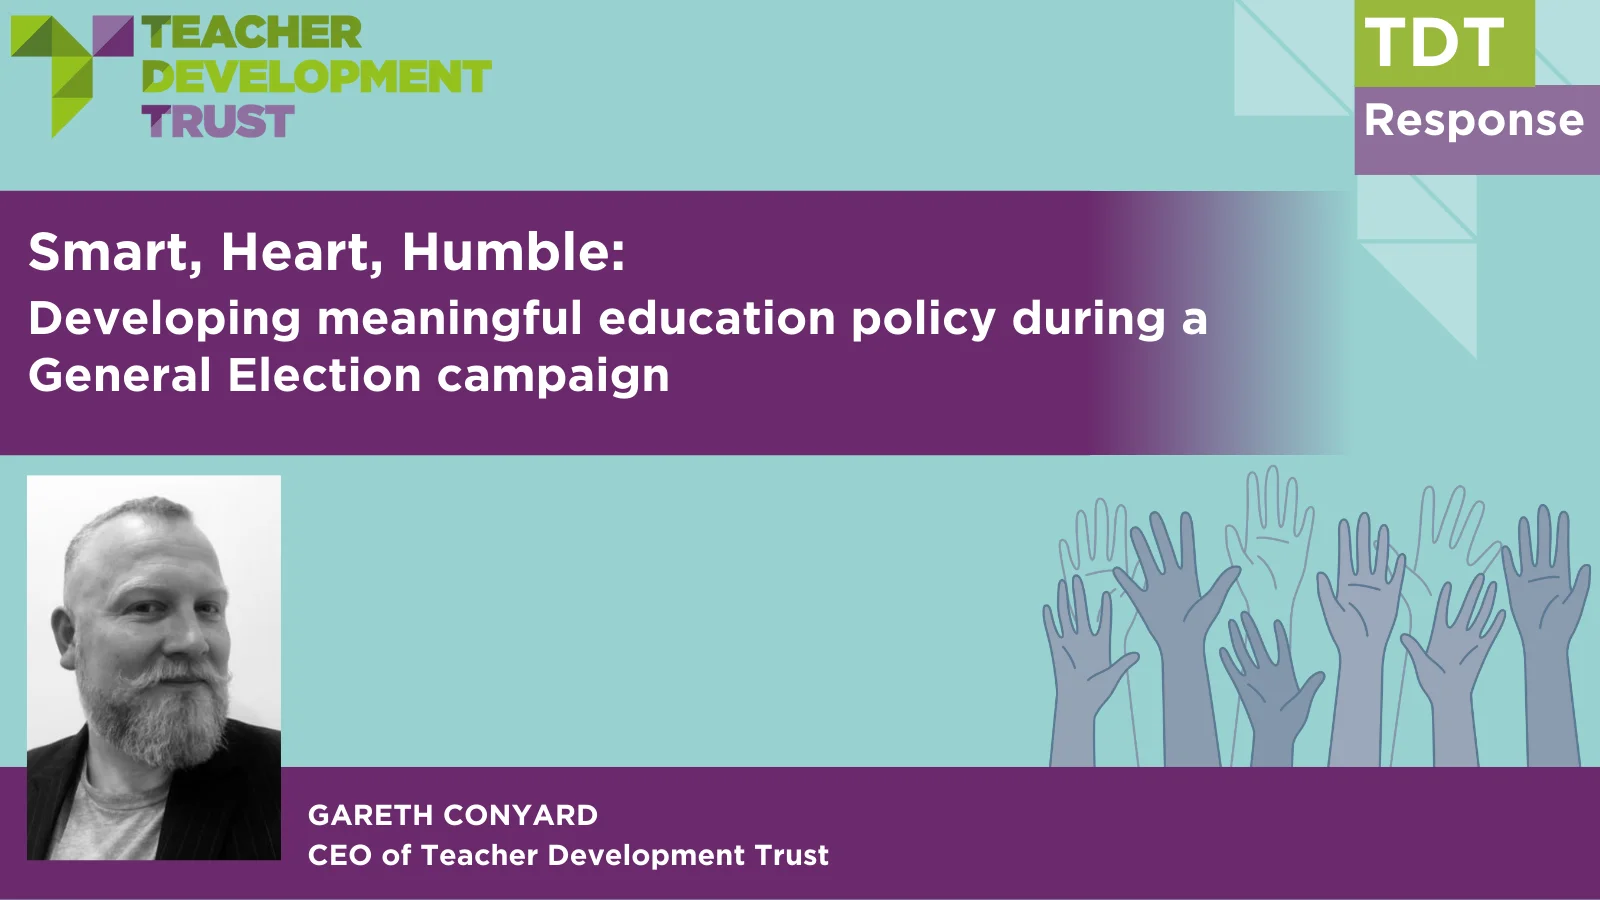 Smart, Heart, Humble: Developing meaningful education policy during a General Election campaign